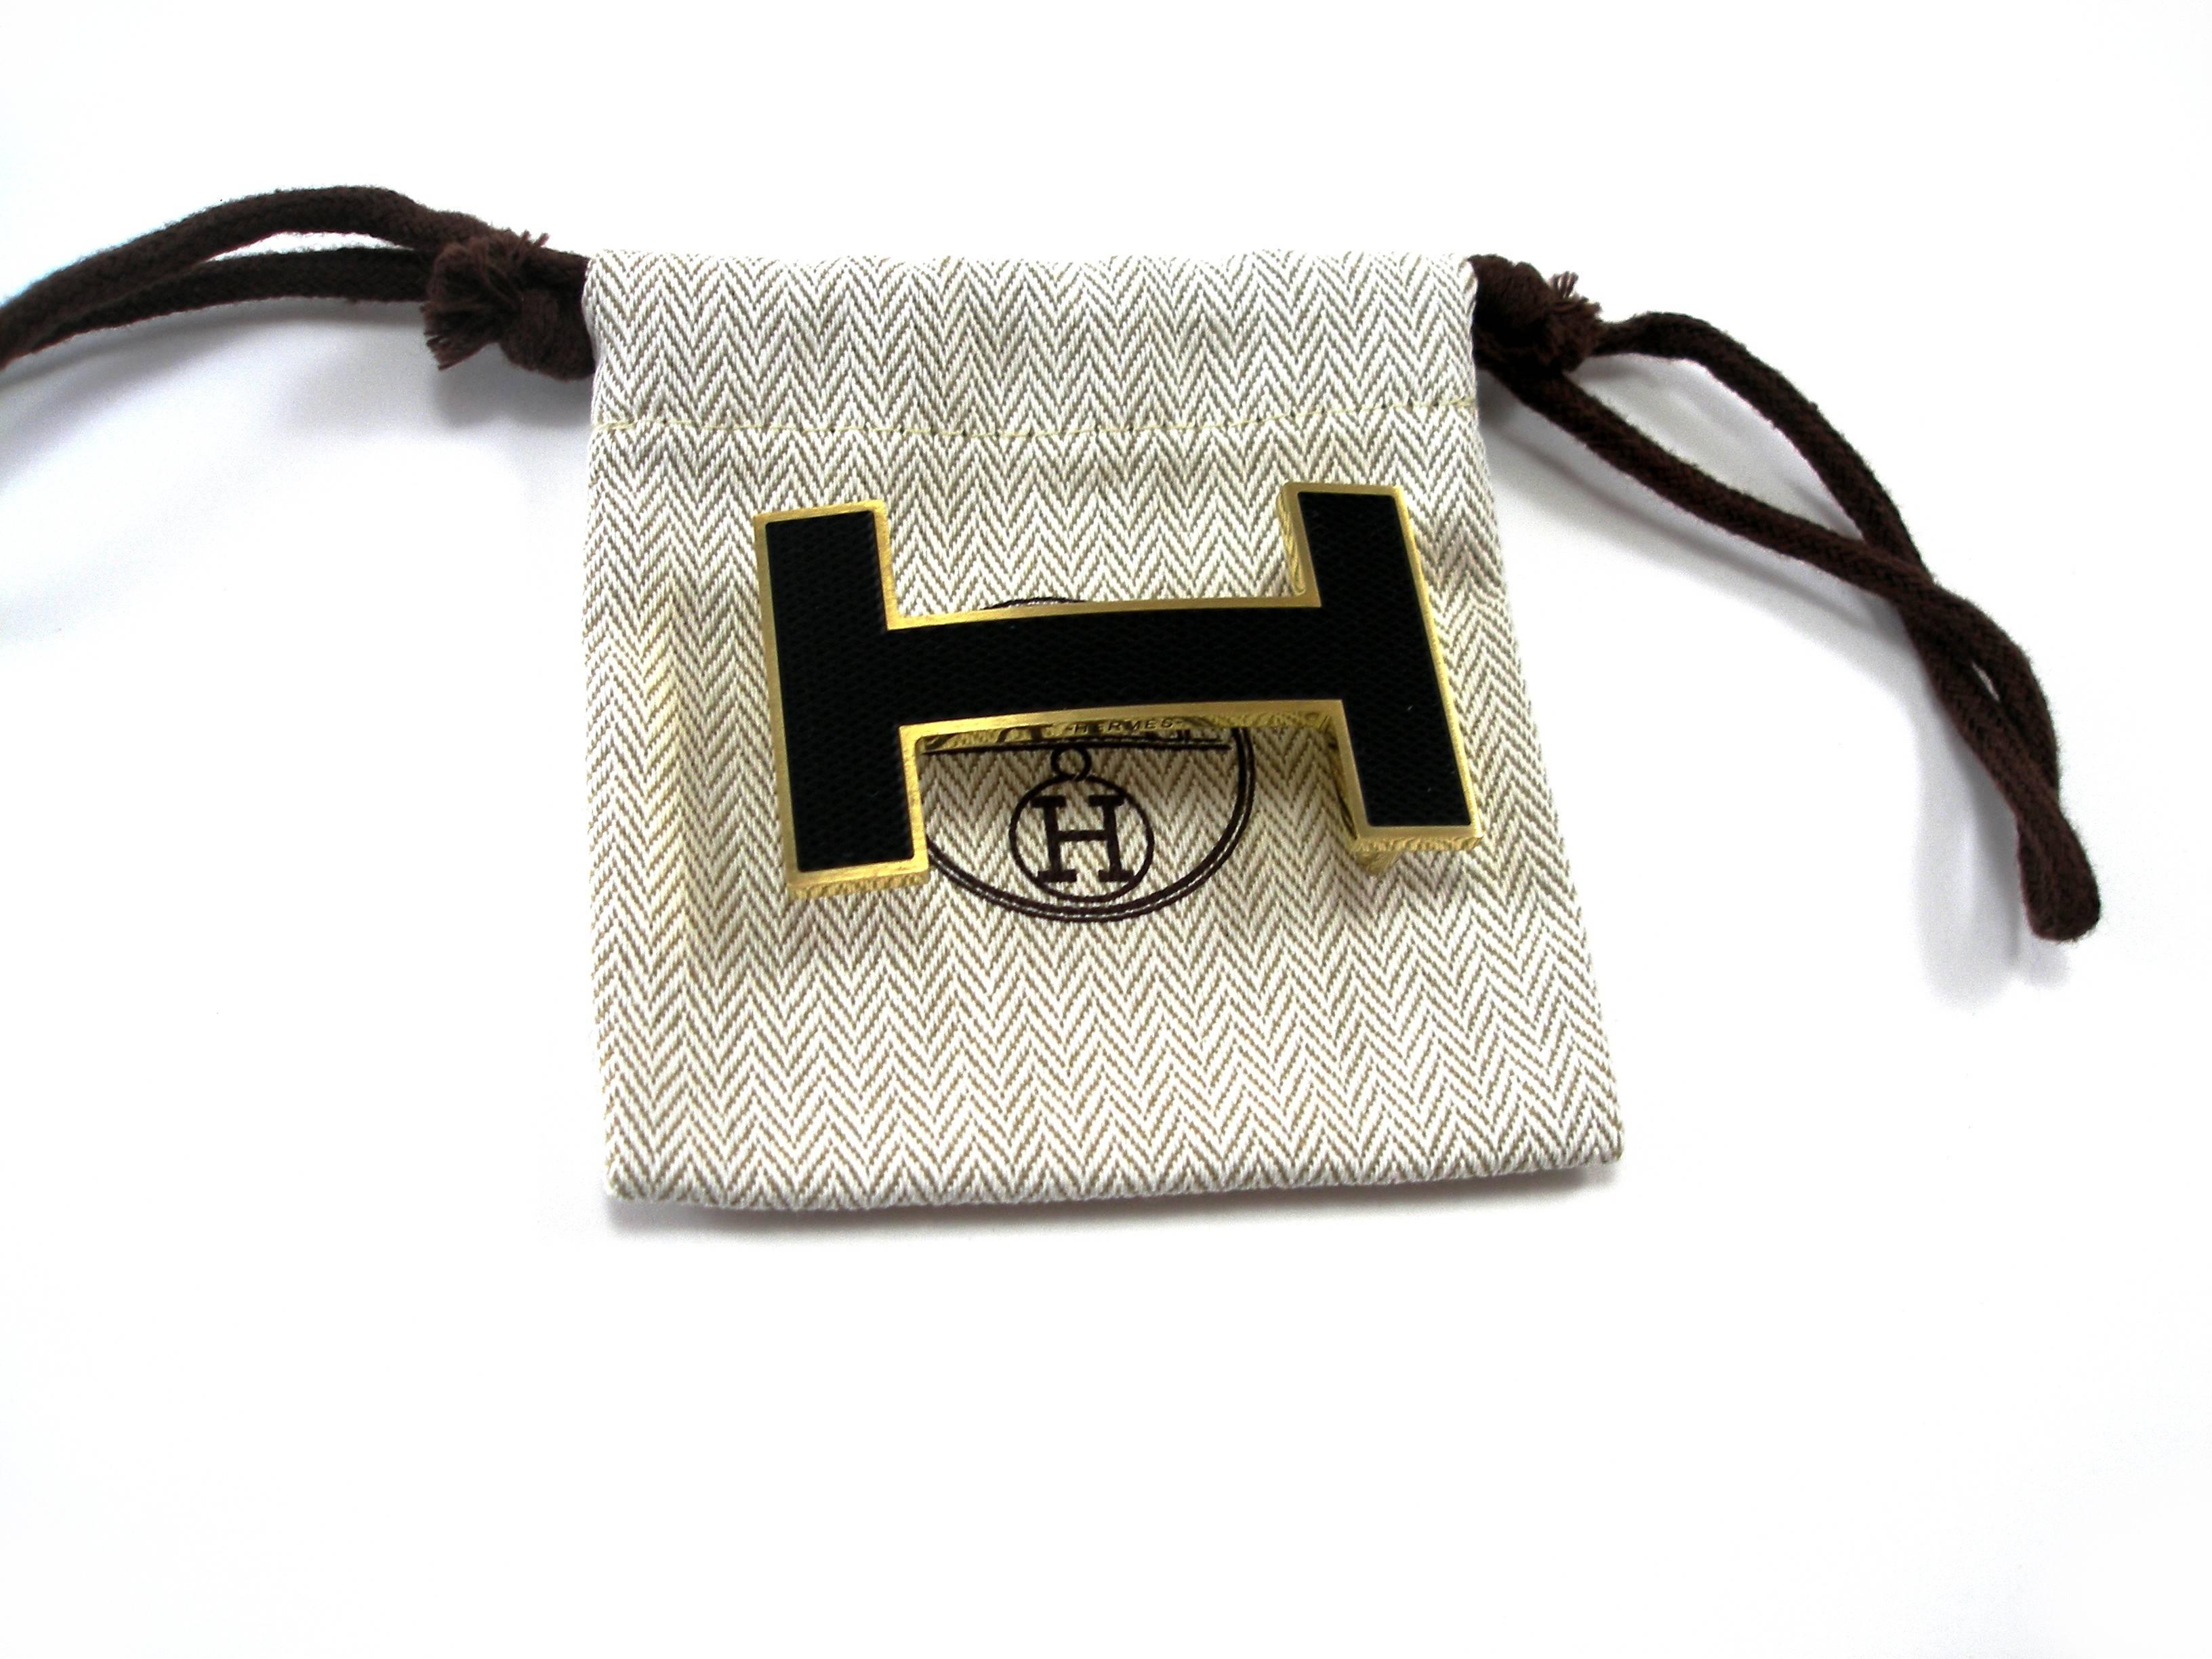 Hermès H Buckle for strap in 32 mm 
Black and gold 
Dimensions :  6 x 3.8 cm 
Only H buckle / no strap 
Good condition 
Signed Hermès 
NO HERMES BOX INCLUDED
Its comes with Hermès dustbag 